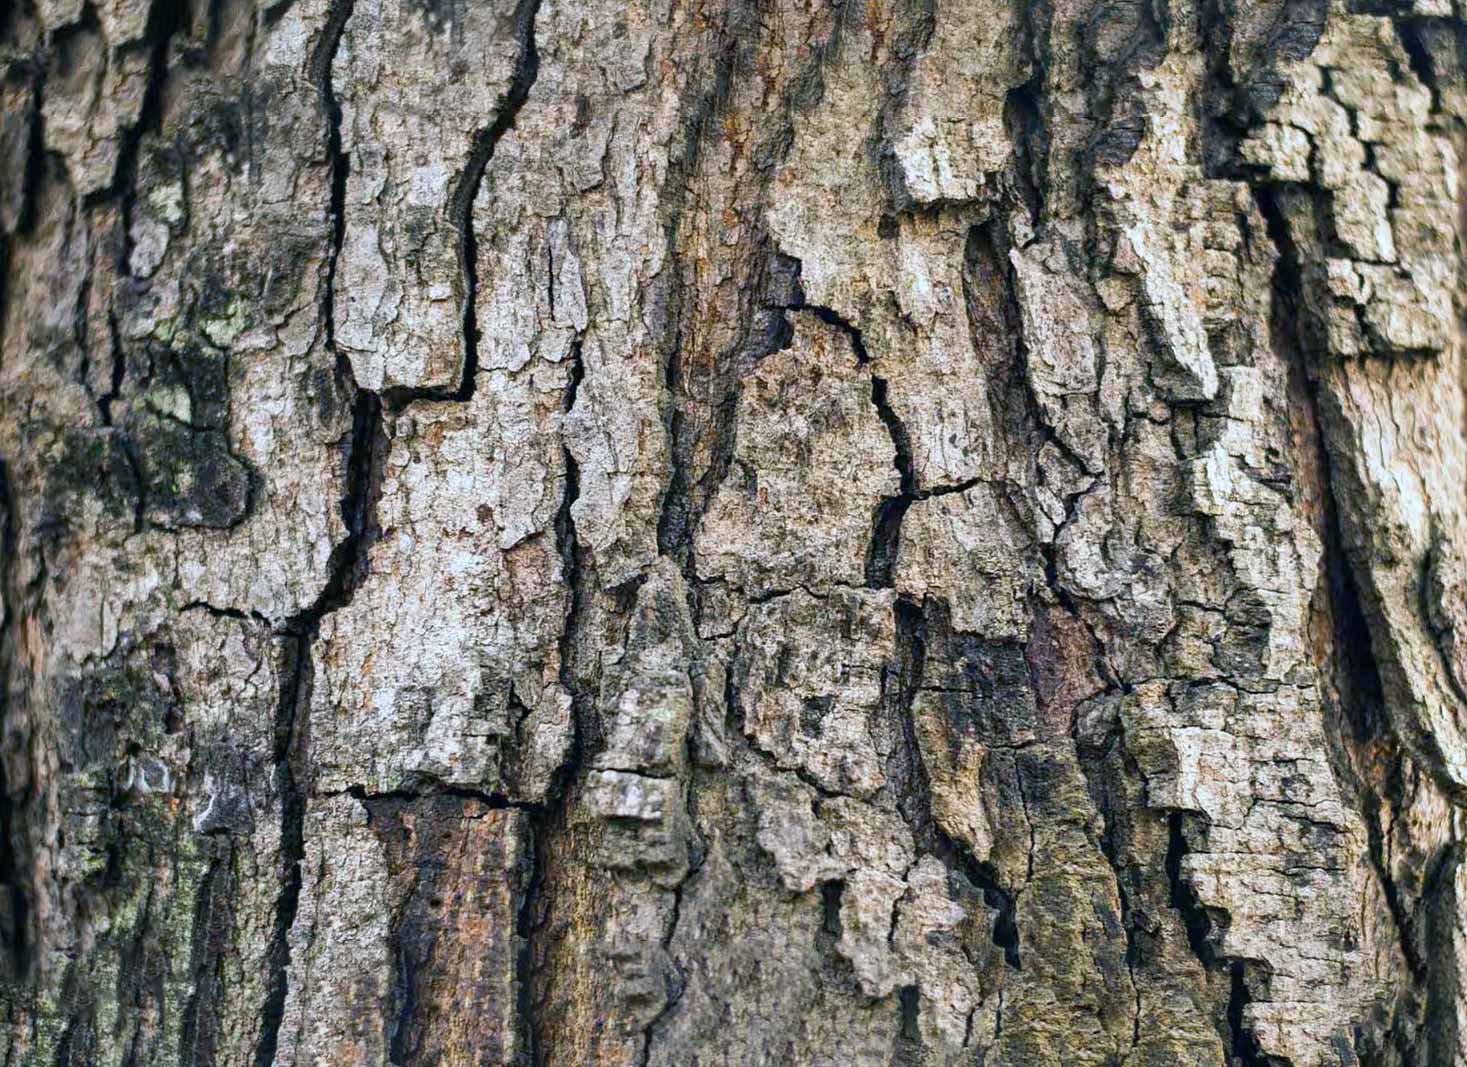 The role of dead cells in bark formation